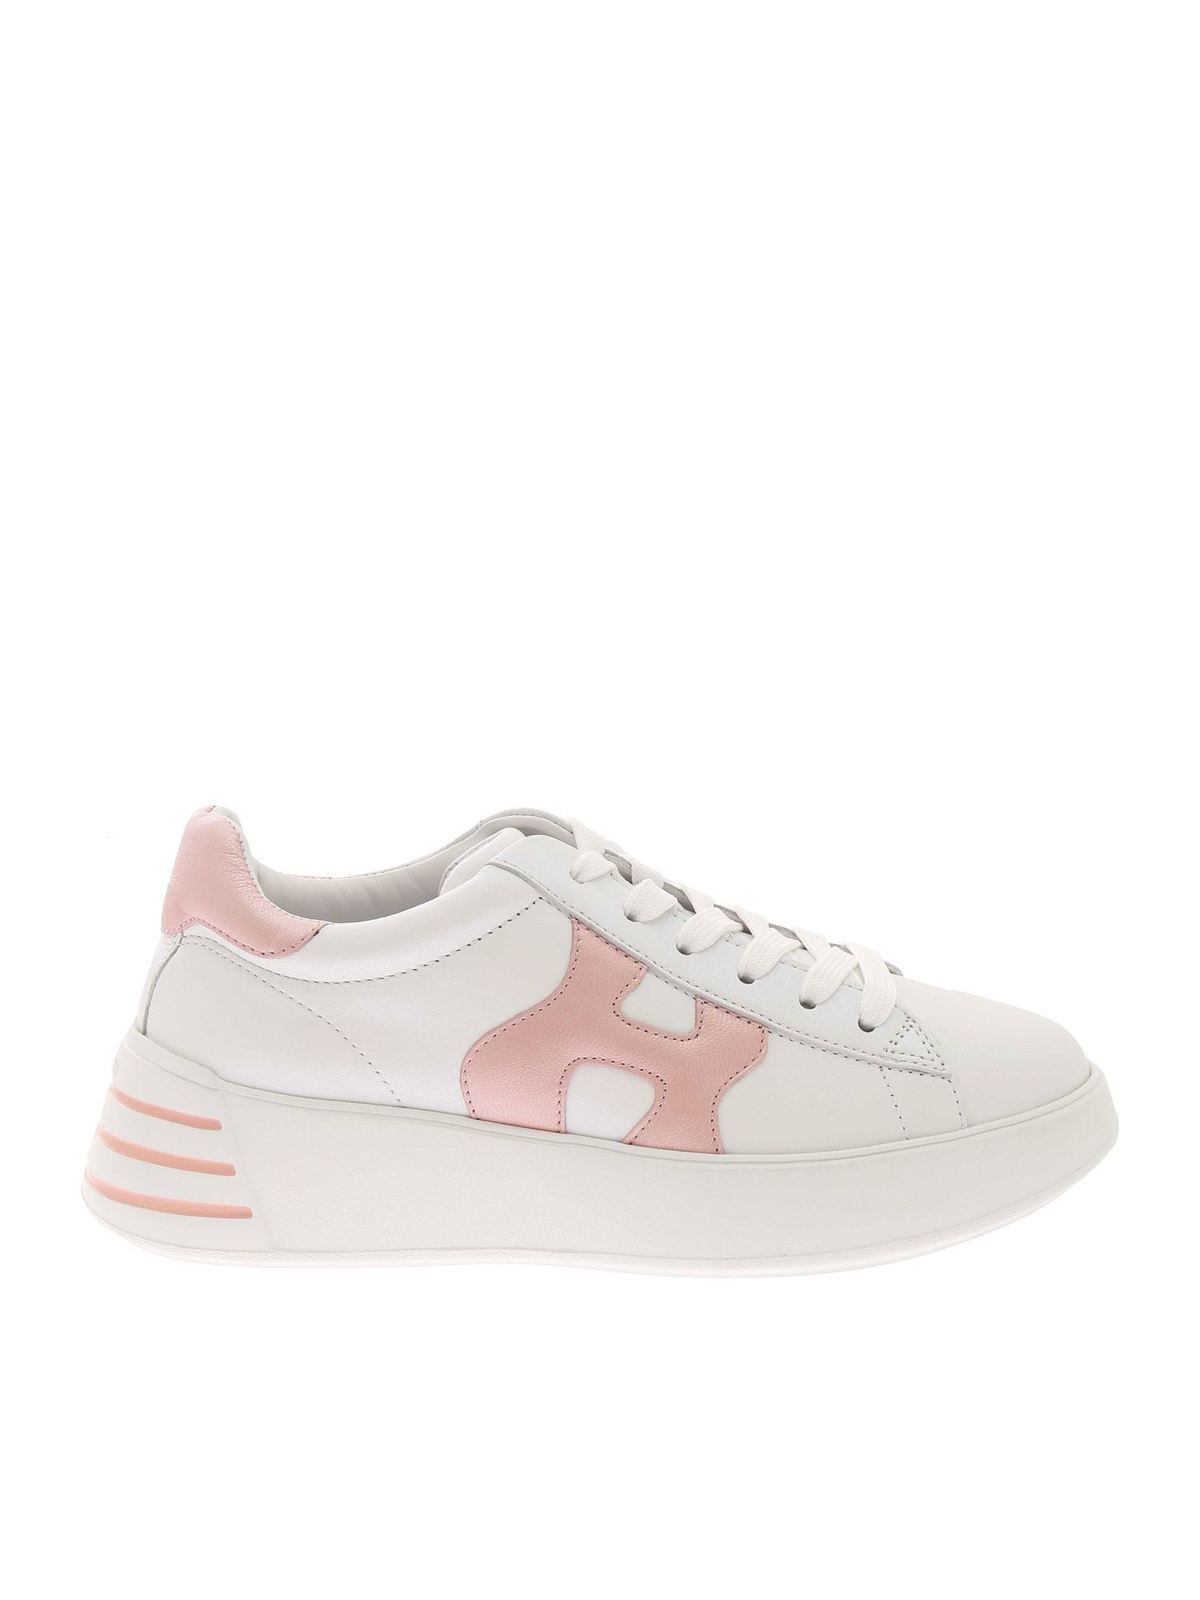 Trainers Hogan - Rebel H564 sneakers in white and pink - HXW5640DN61Q5M0RX6